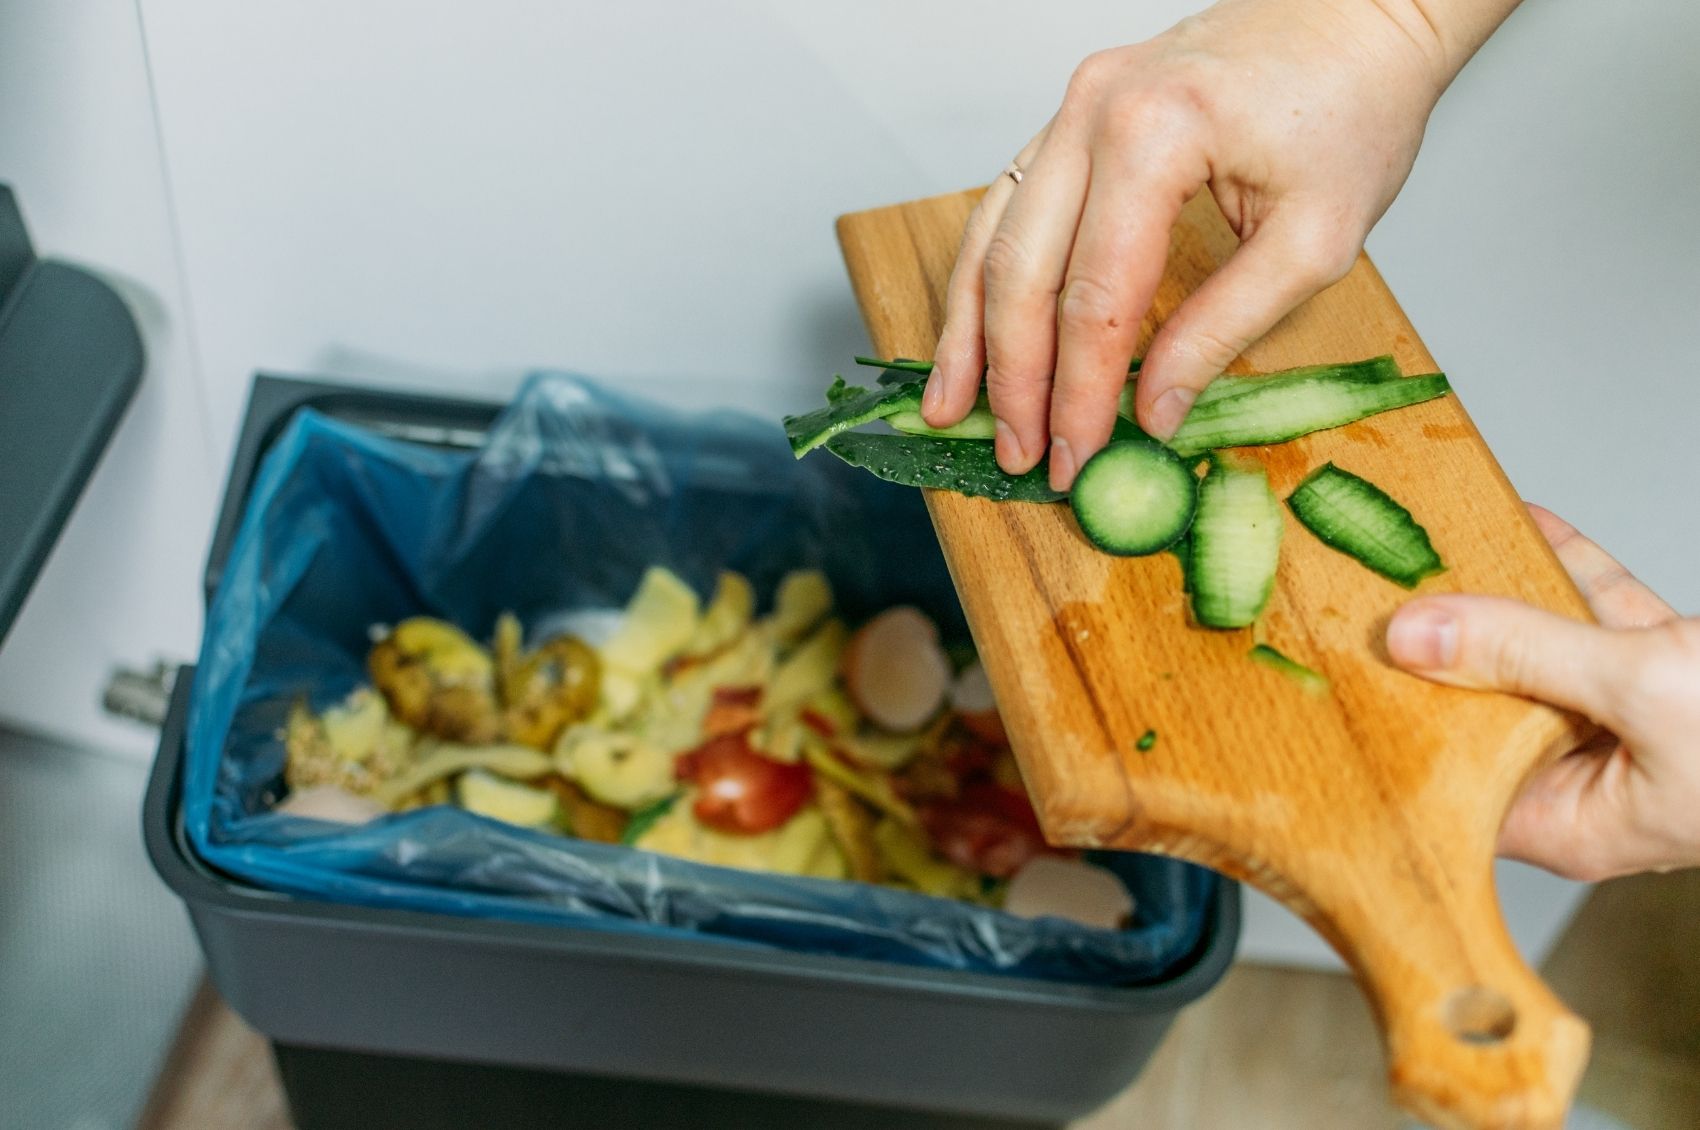 How Can Food Safety Help Reduce Waste In The Foodservice Industry?